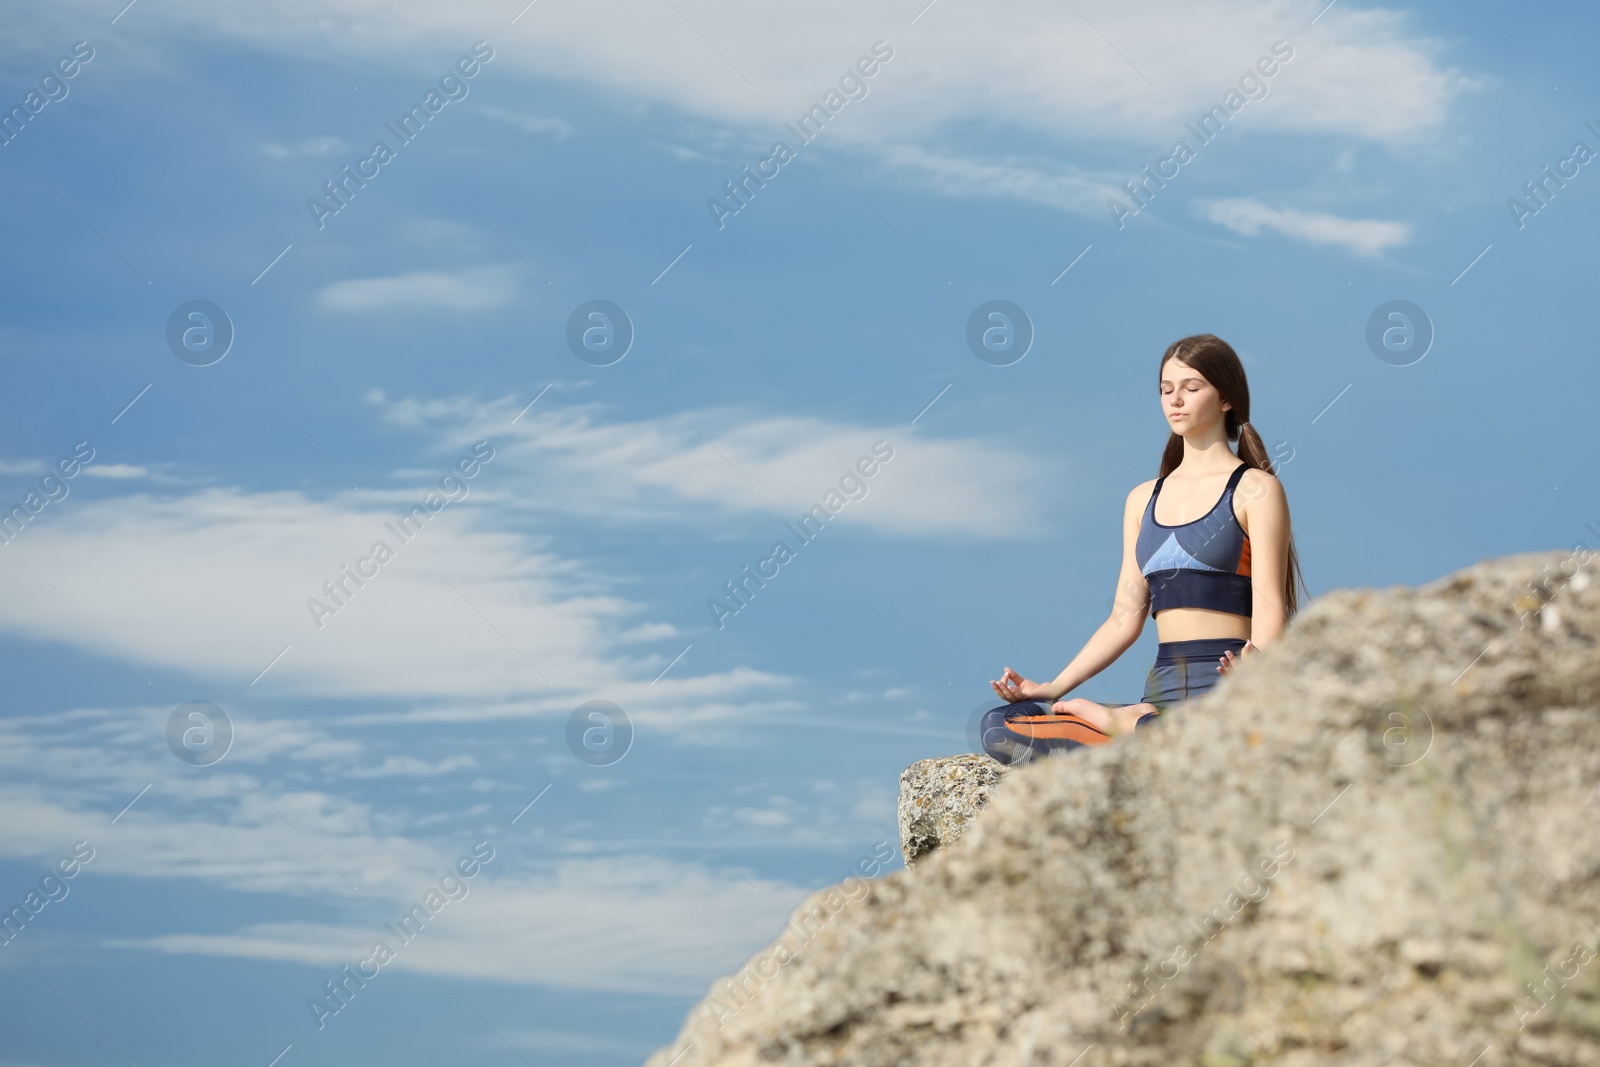 Photo of Teenage girl meditating on cliff against blue sky. Space for text